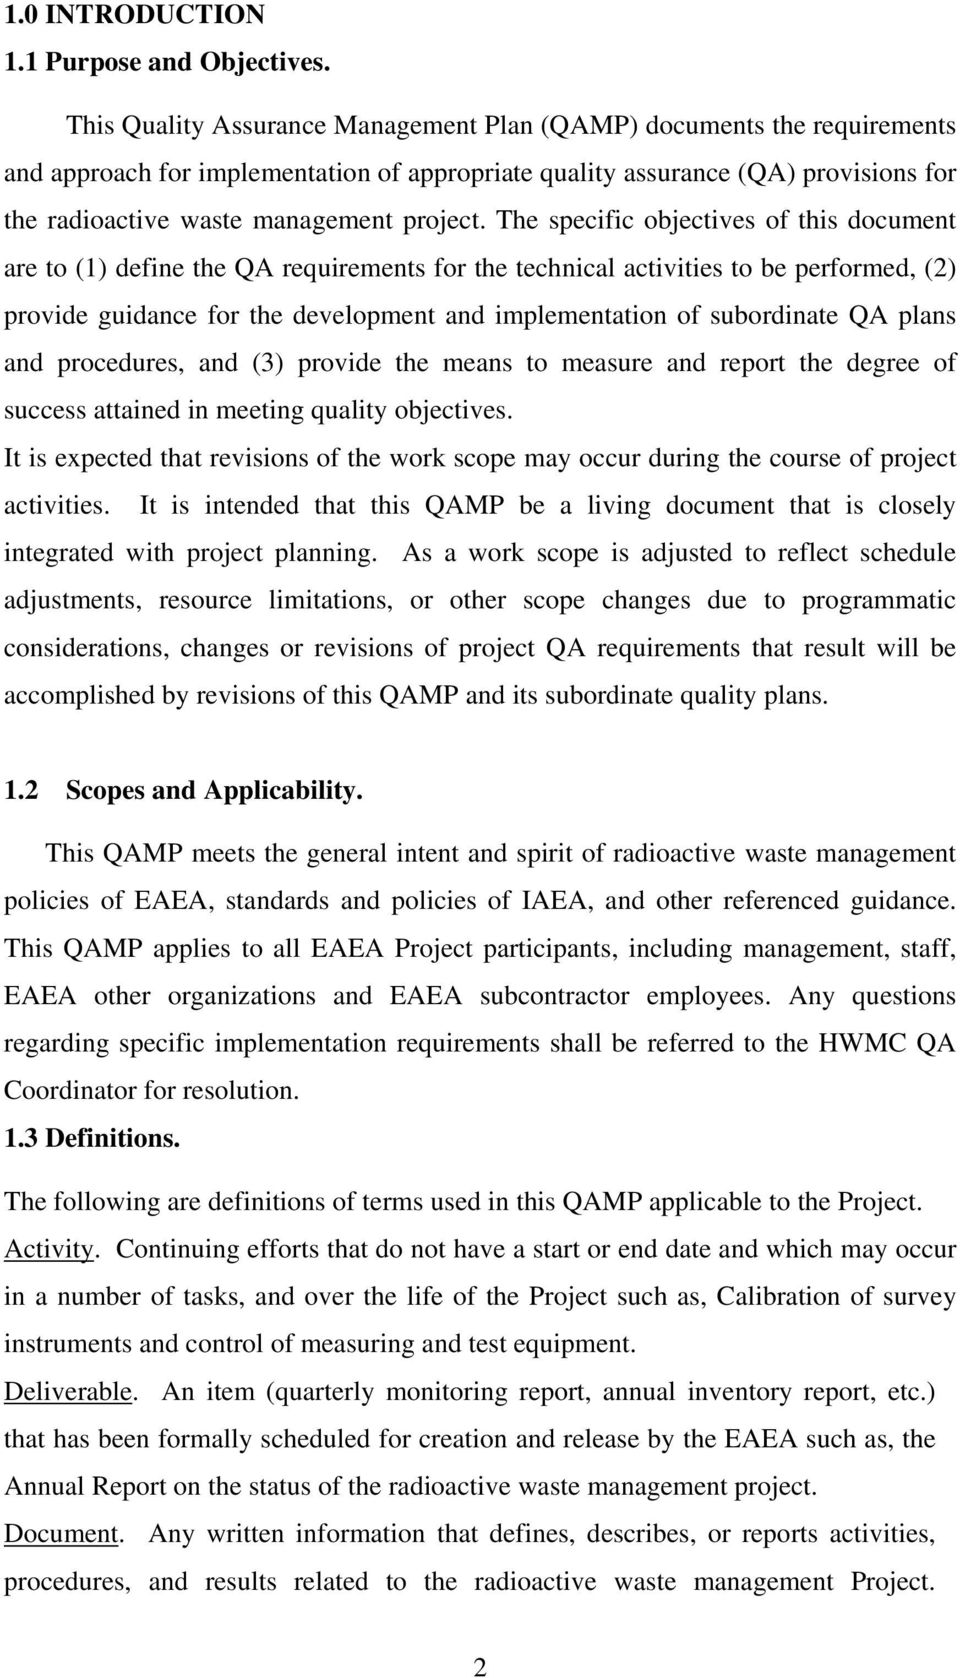 The specific objectives of this document are to (1) define the QA requirements for the technical activities to be performed, (2) provide guidance for the development and implementation of subordinate